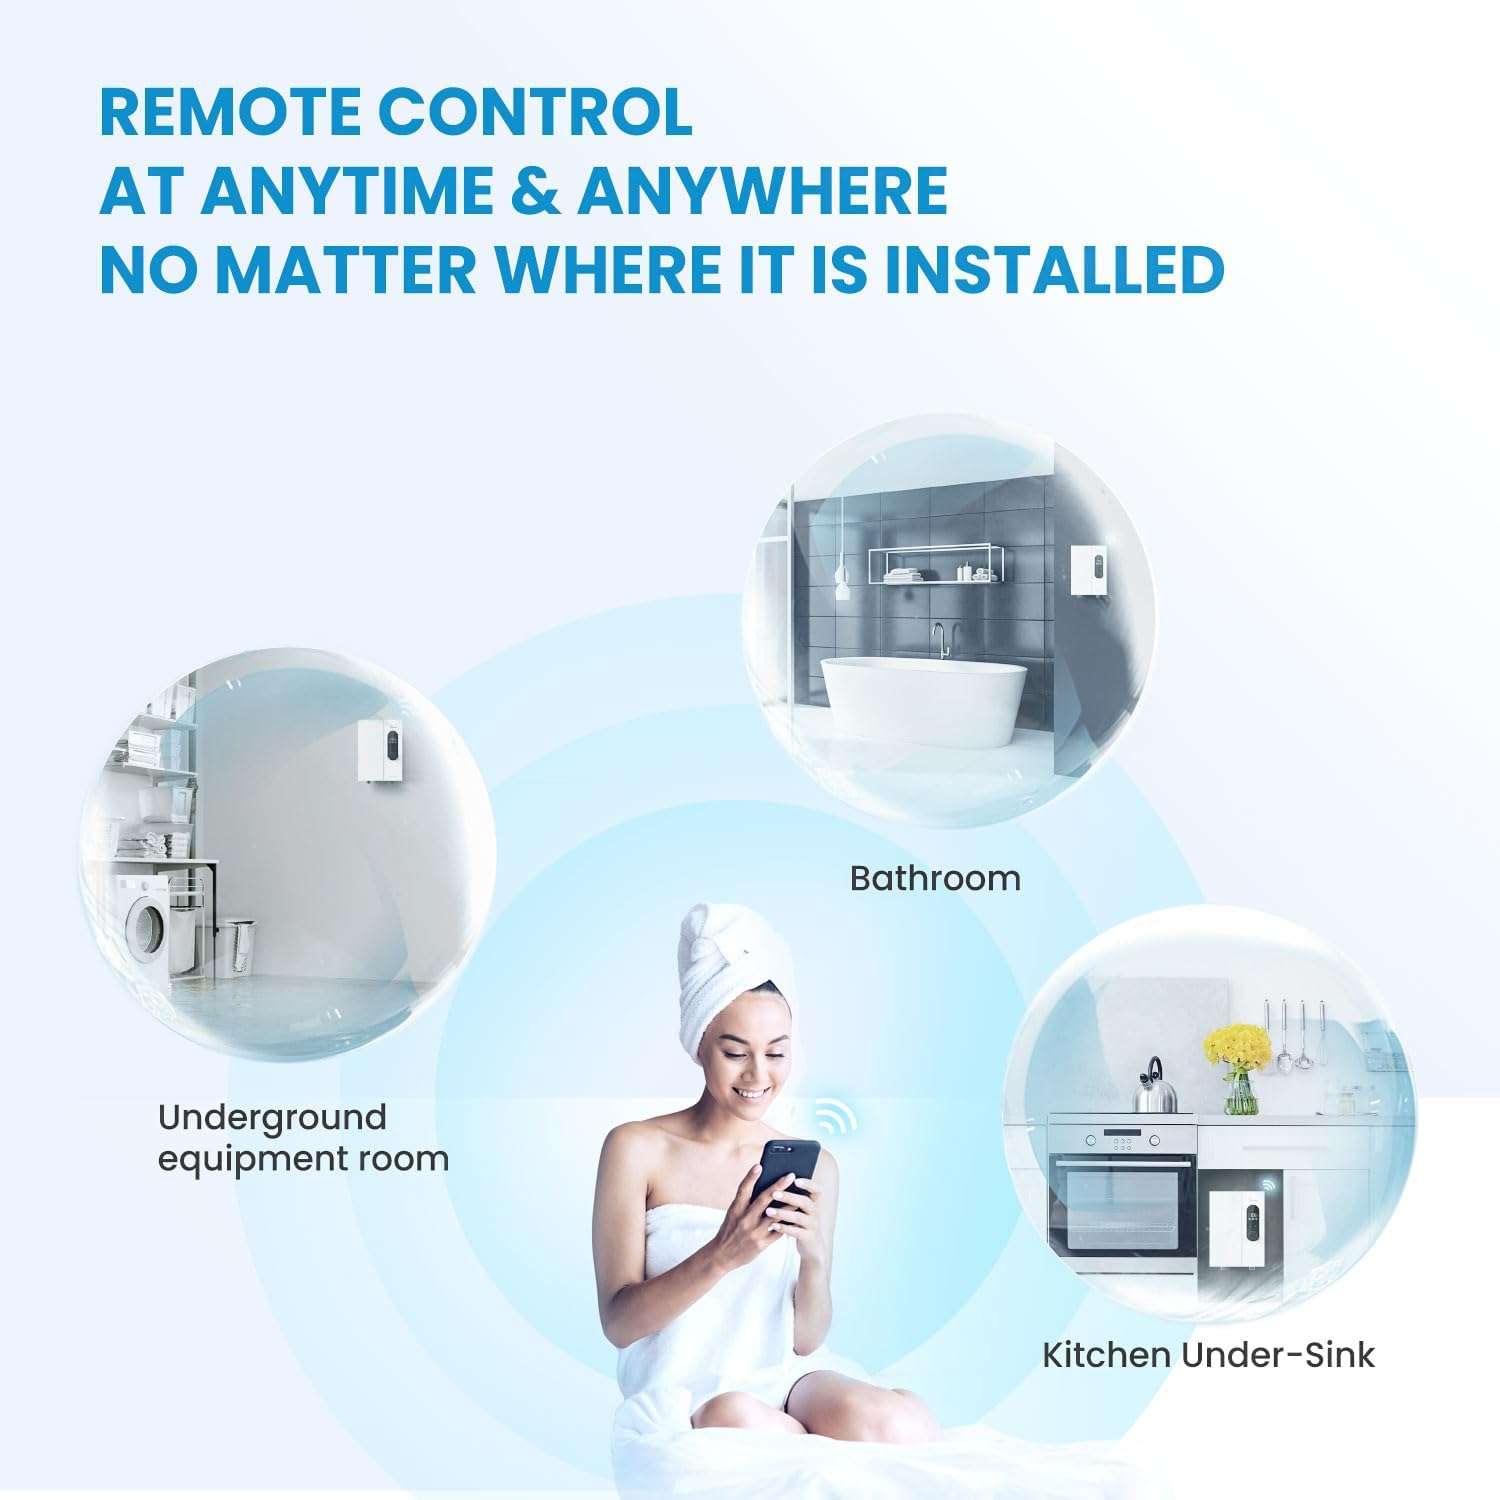 https://d1pjg4o0tbonat.cloudfront.net/content/dam/midea-aem/us/water-heaters/midea-18kw-electric-tankless-water-heater,-touch-control,-wi-fi-control,-led-display,-child-mode,-240-volts-with-automatic-power-modulation,-on-demand-hot-water,-white/remote-control.jpg/jcr:content/renditions/cq5dam.web.5000.5000.jpeg